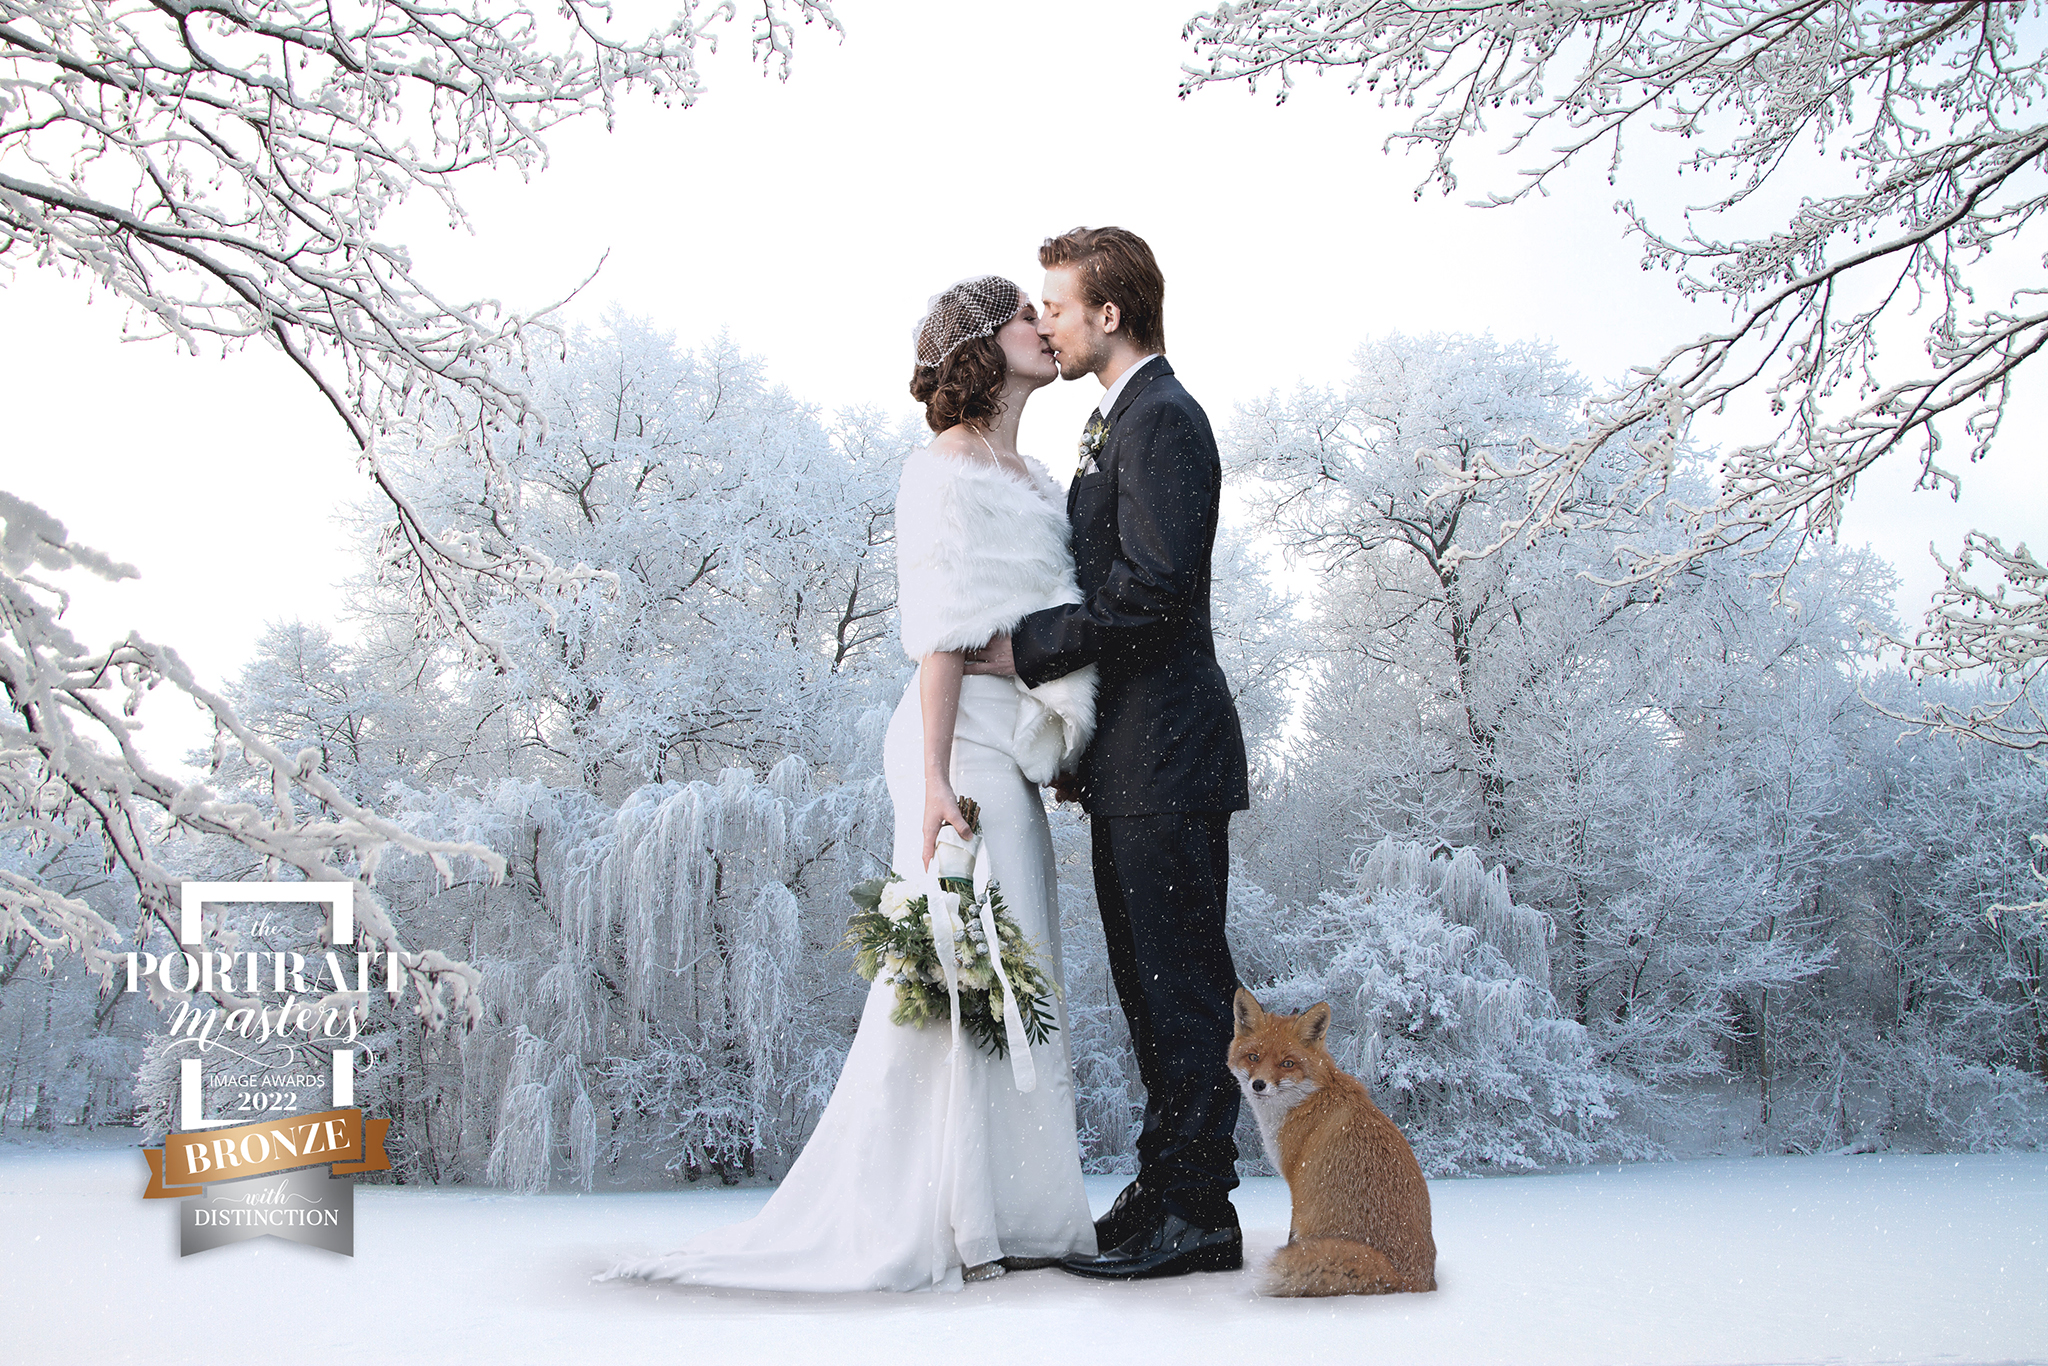 bronze award wedding couple standing in the snow with a fox sitting next to them